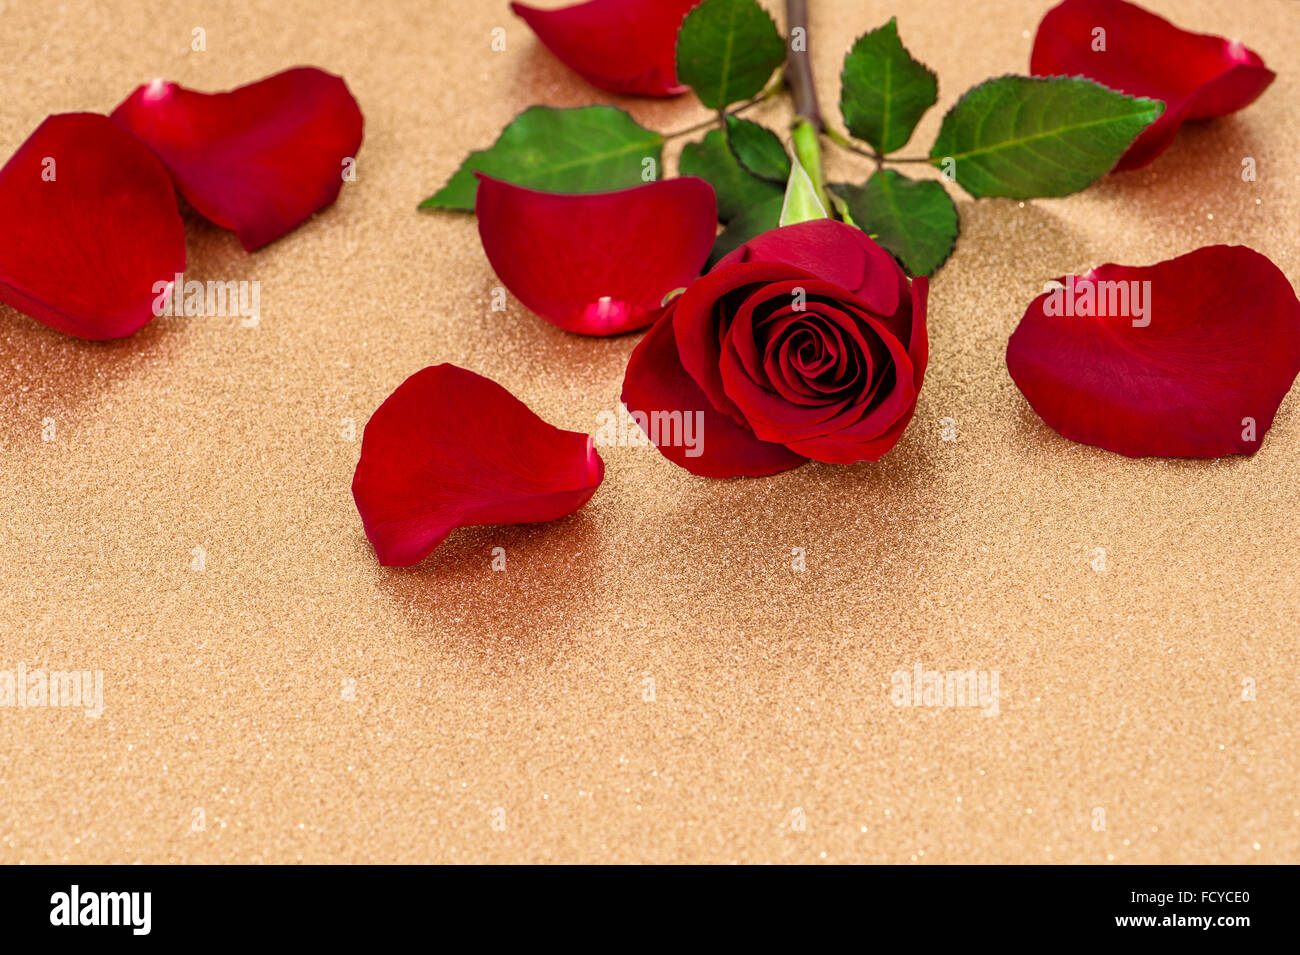 Red rose with petals on golden background Stock Photo